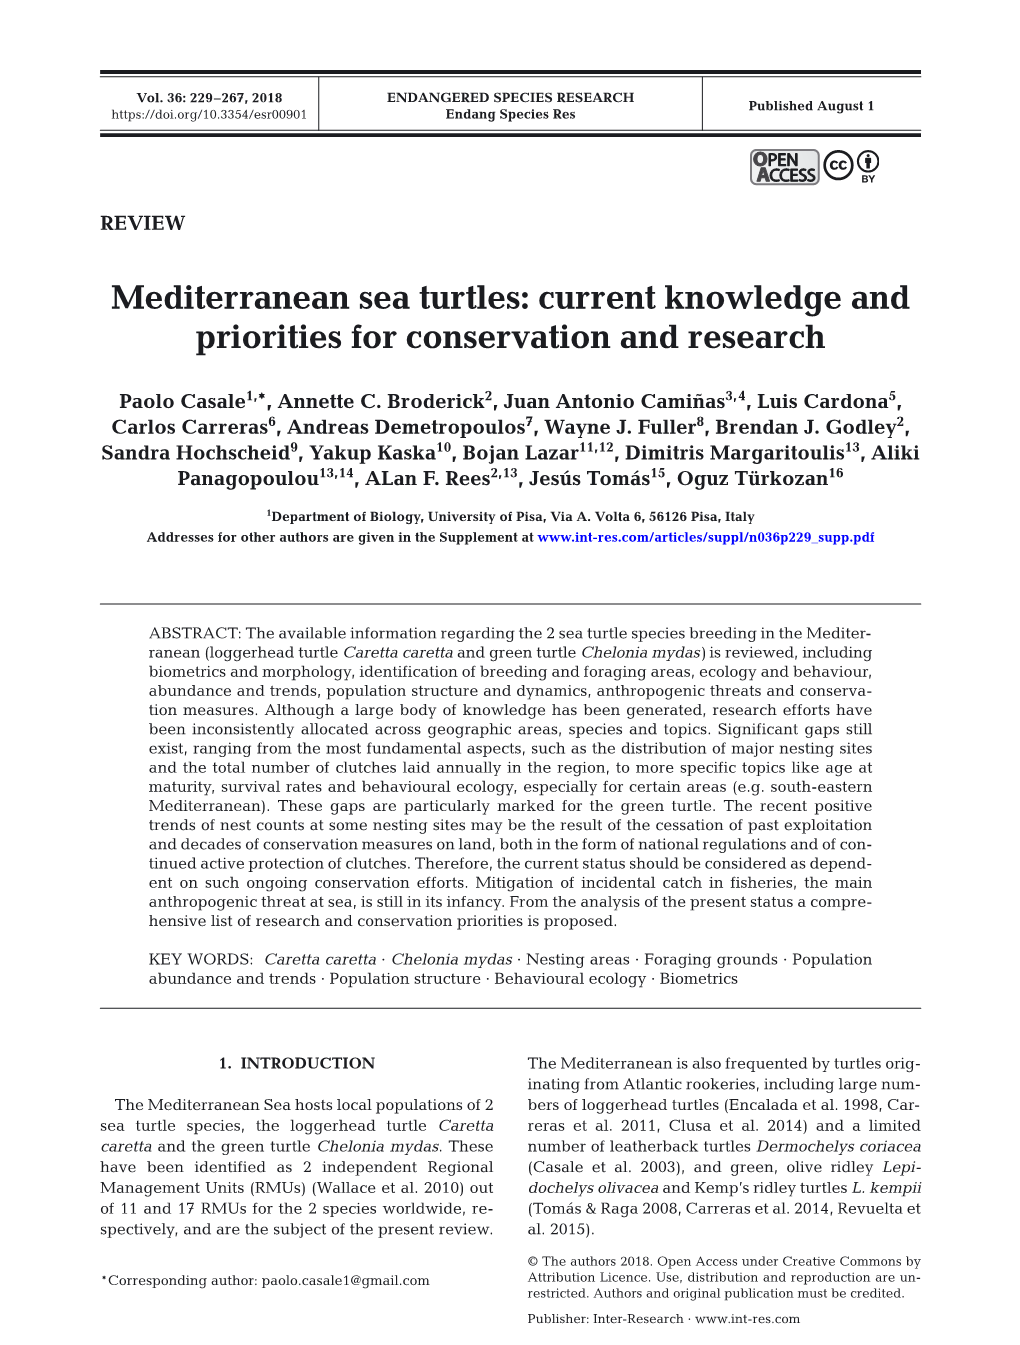 Mediterranean Sea Turtles: Current Knowledge and Priorities for Conservation and Research